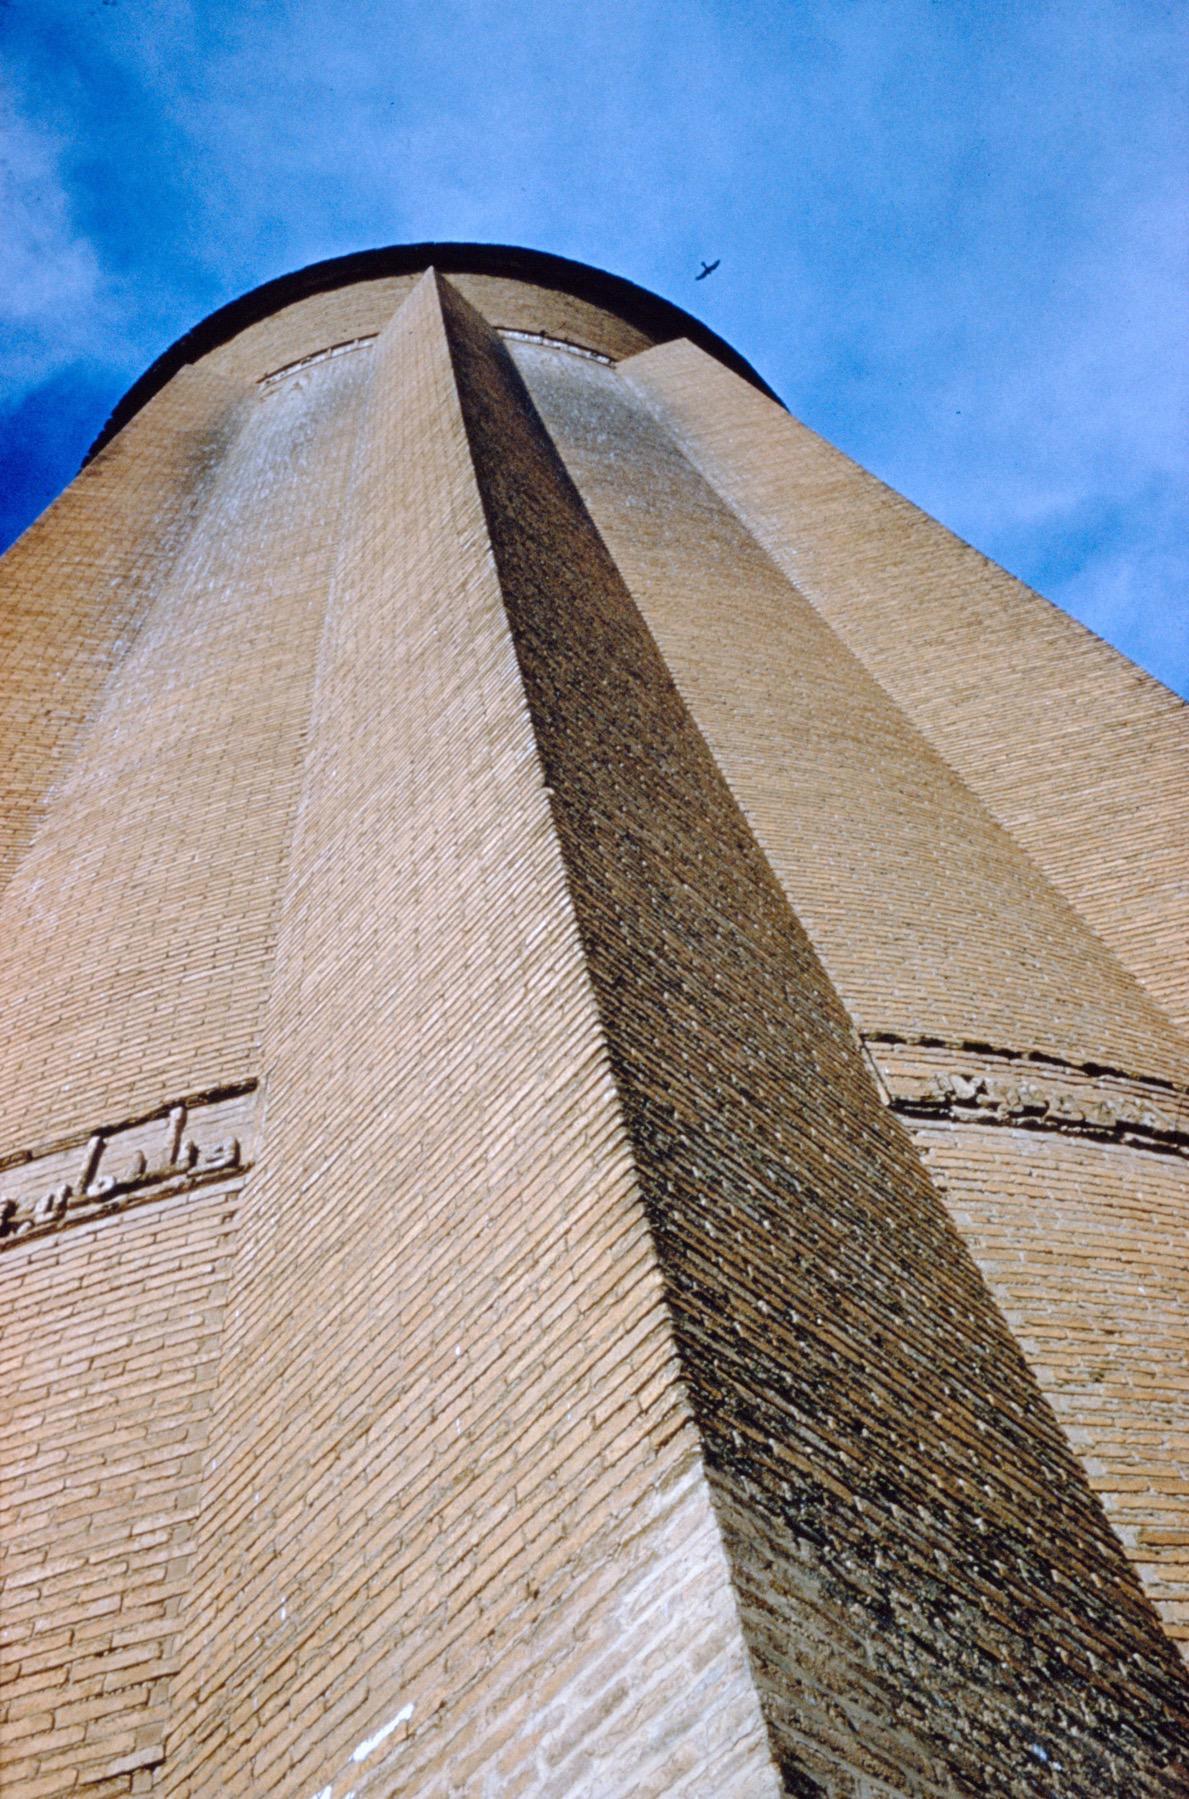 Exterior view looking up tower, showing exterior flanges with Kufic inscription